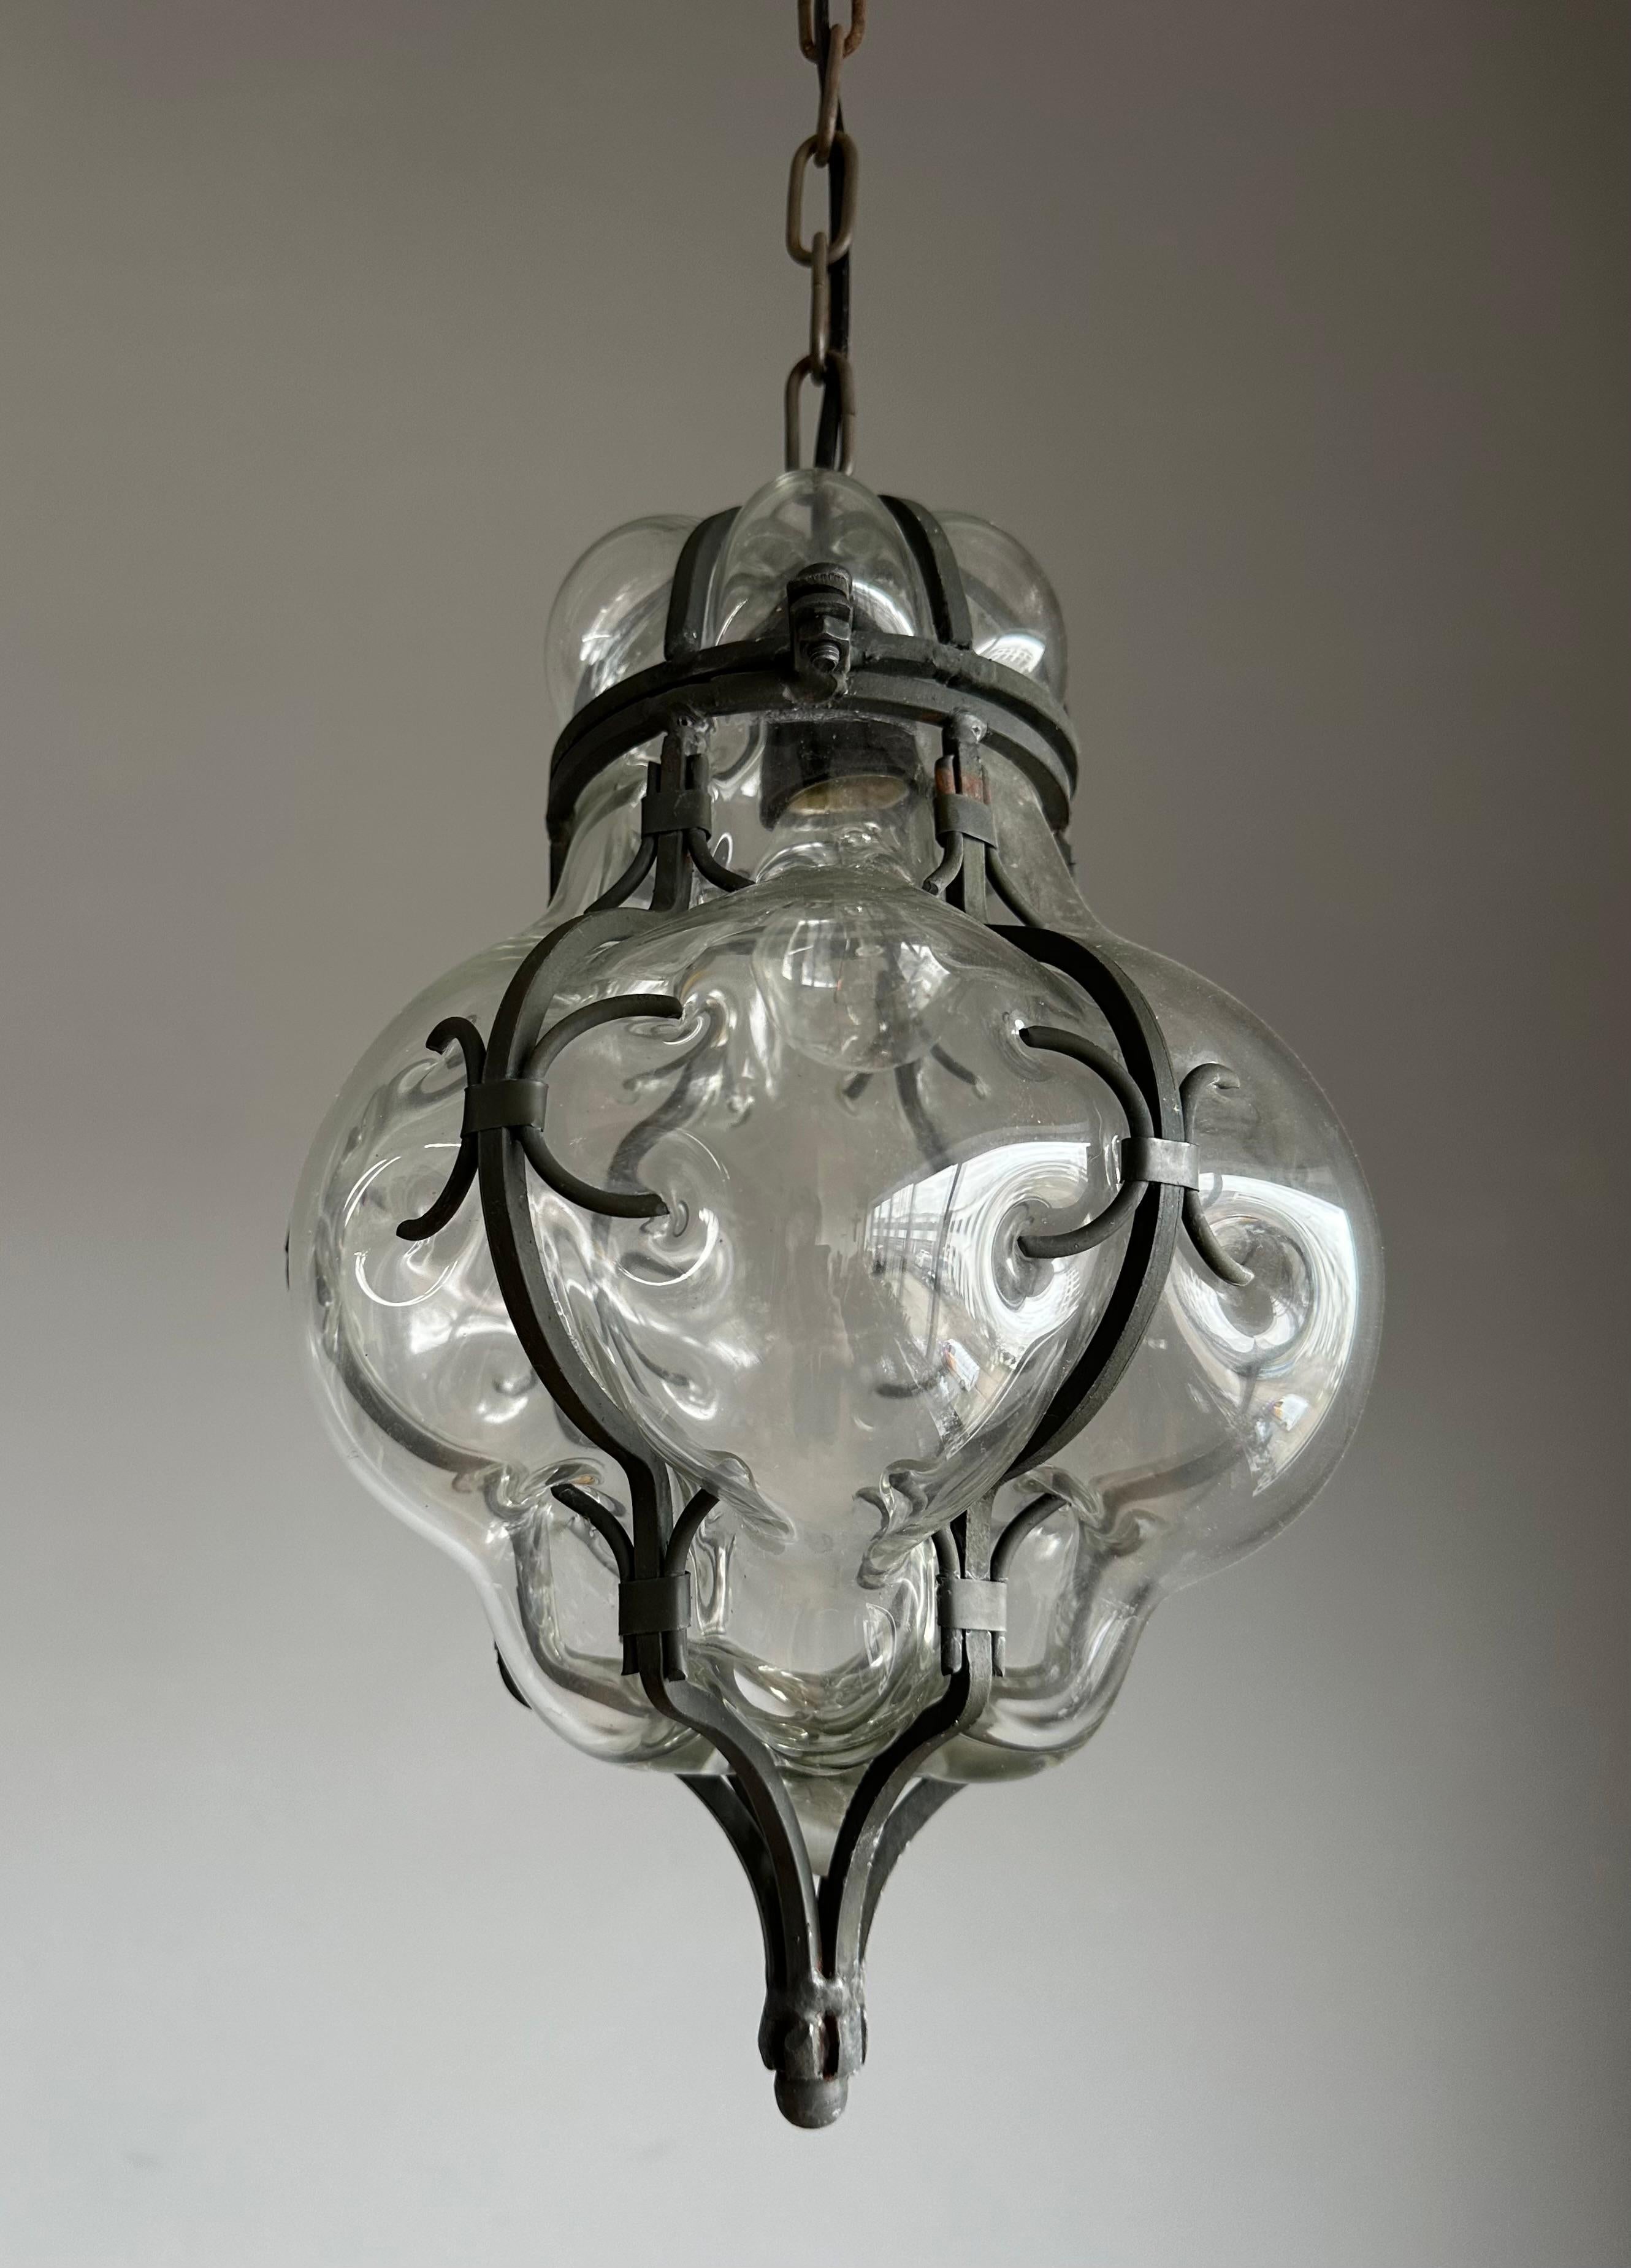 This handcrafted and stylish pendant is in near-mint condition.

This single light, Italian pendant  is very beautiful, both in shape and in color. The stunning clear glass is mouth-blown into a hand forged, wrought iron frame and the result truly